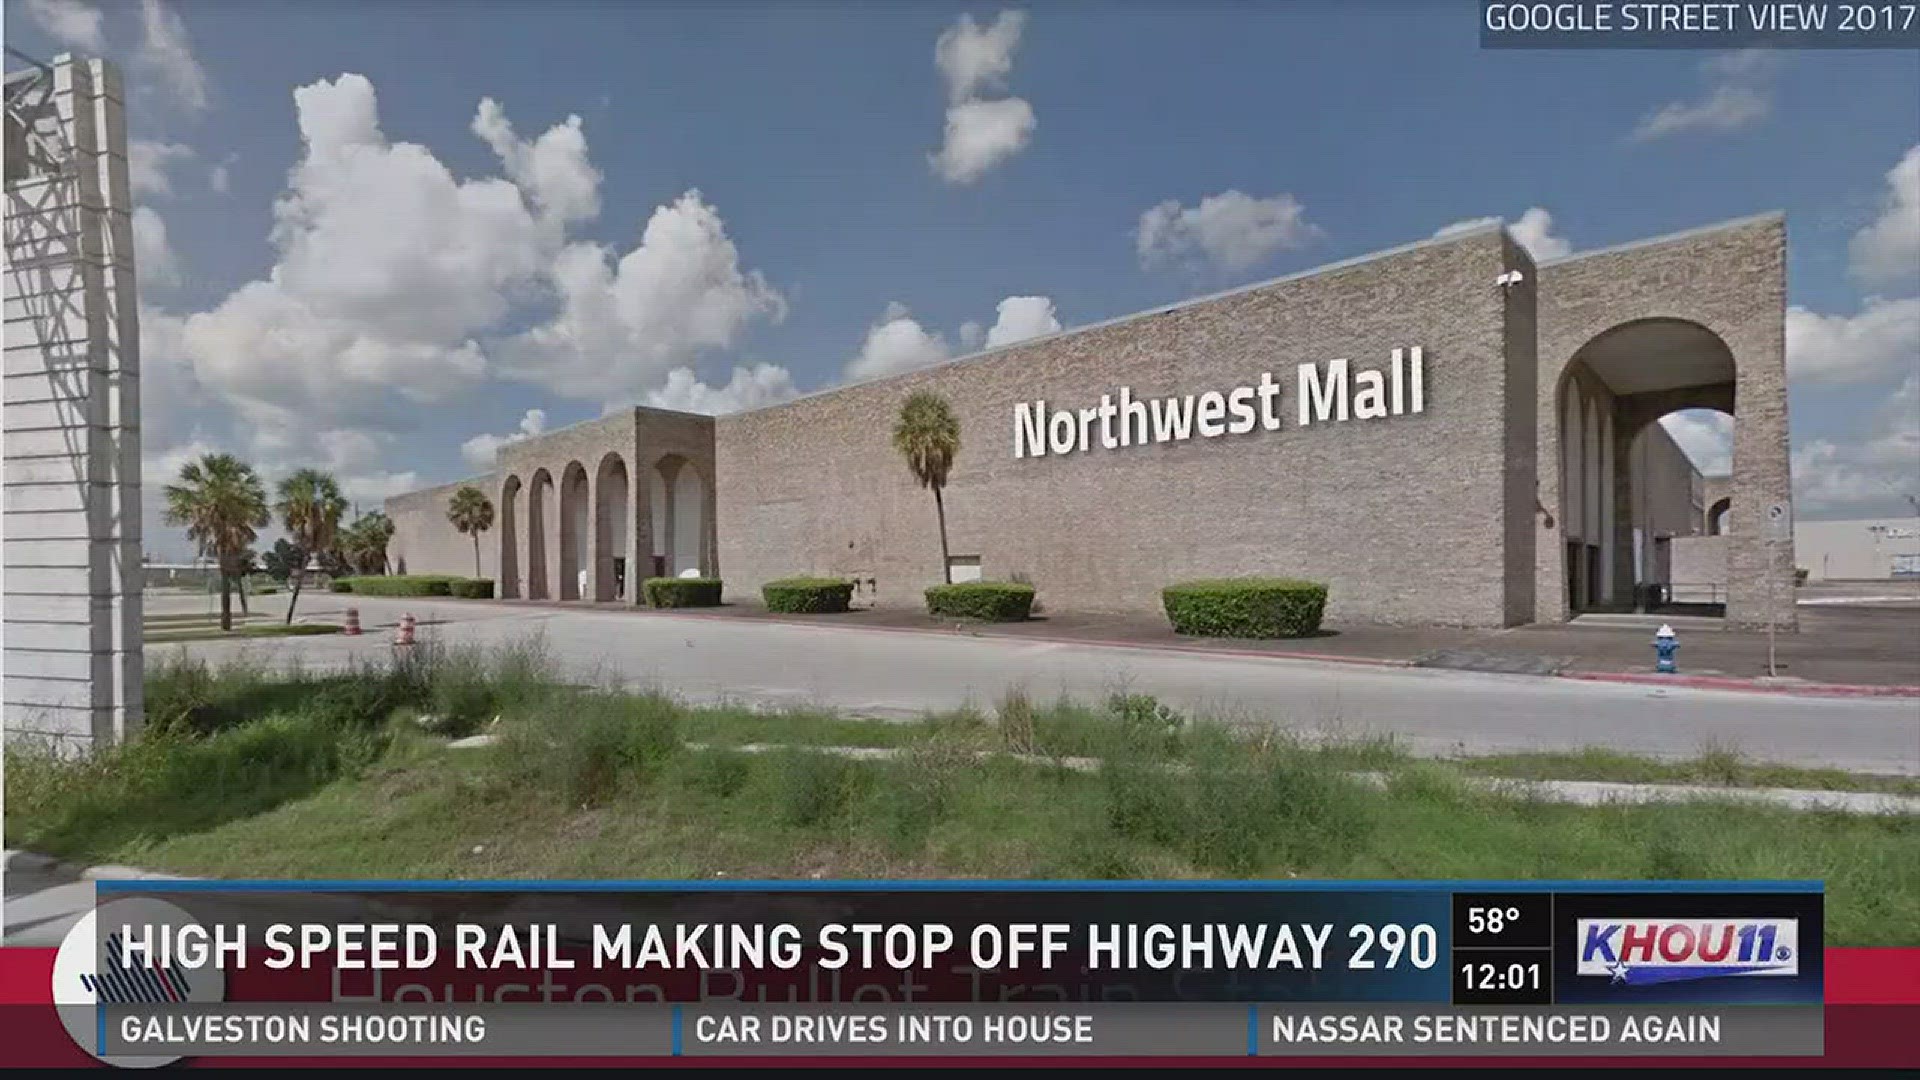 Texas Central announced Monday that Northwest Mall is the "preferred location" for the Houston bullet train station. At up to 205 miles per hour, the bullet train will move passengers between Houston and Dallas in 90 minutes.